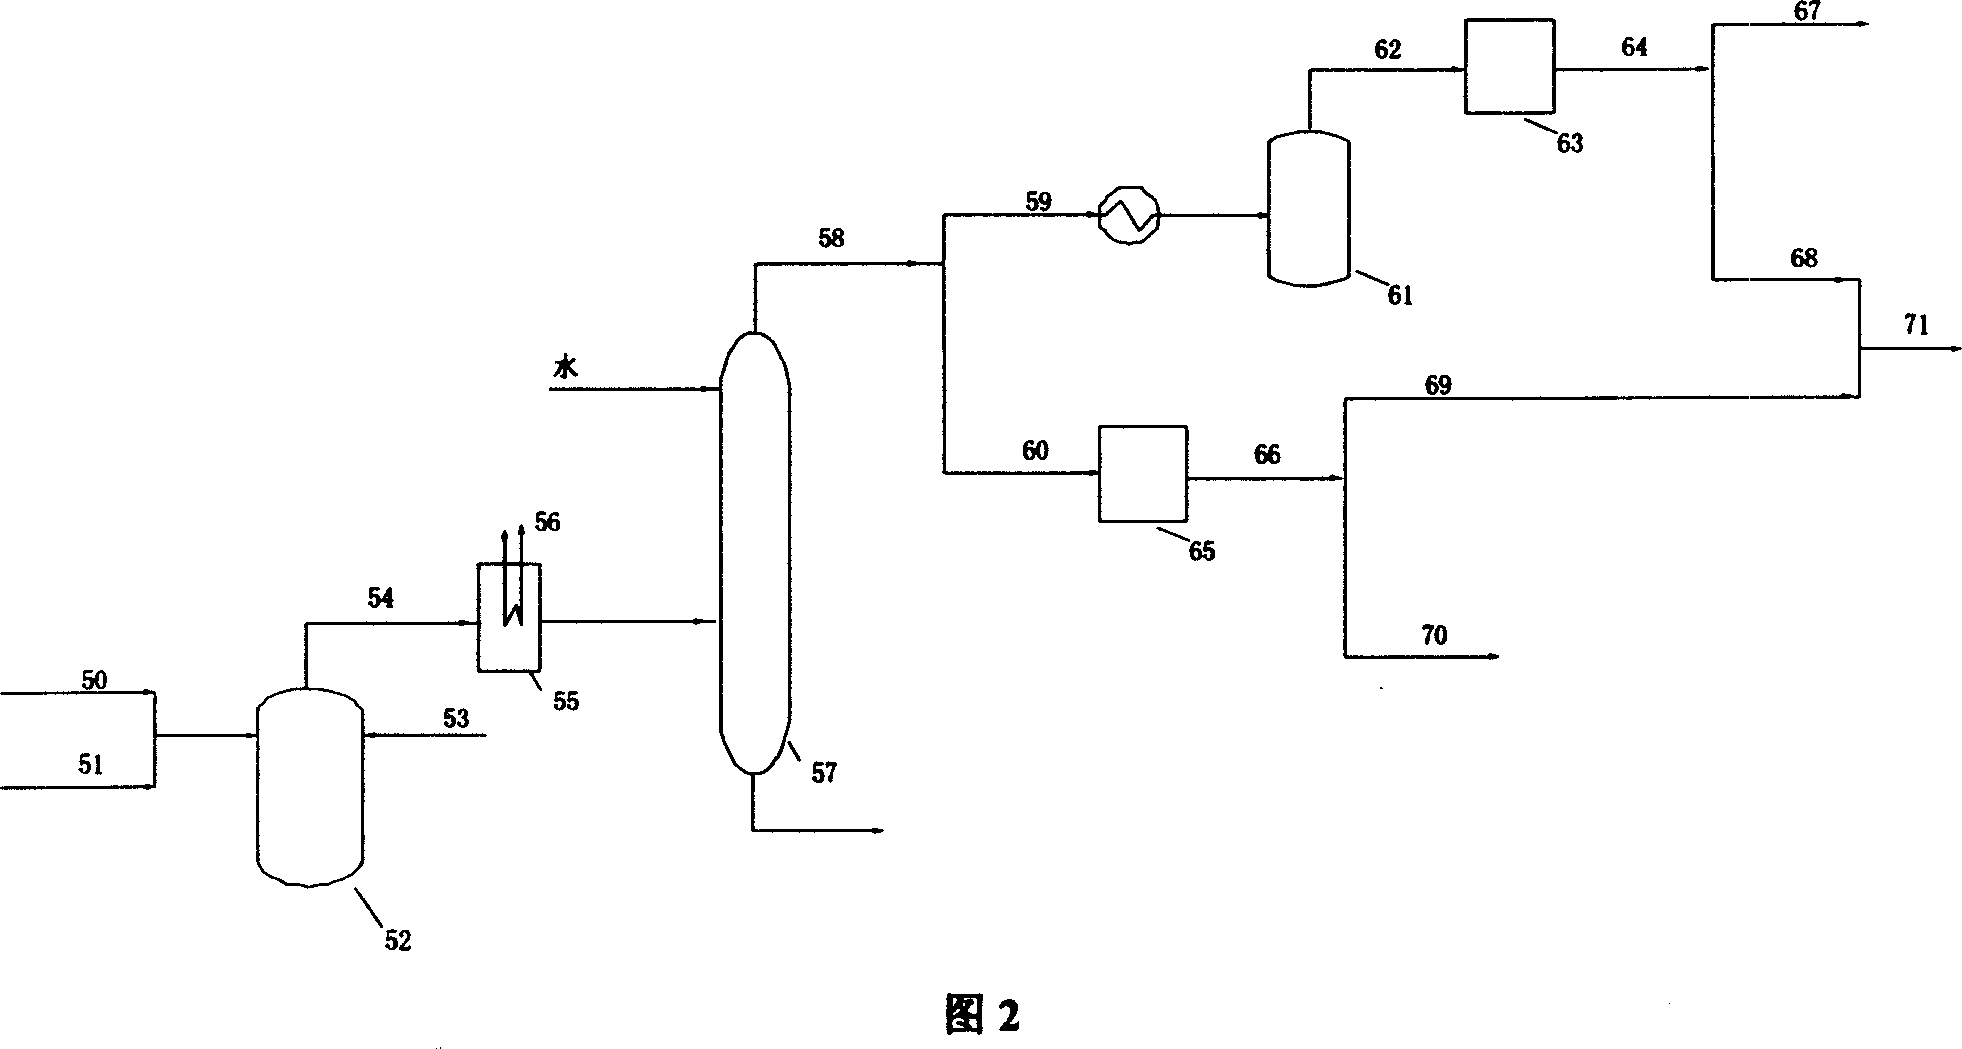 Method of coproducing oil product, methanol and electric energy using carbon containing combustible solid as raw material